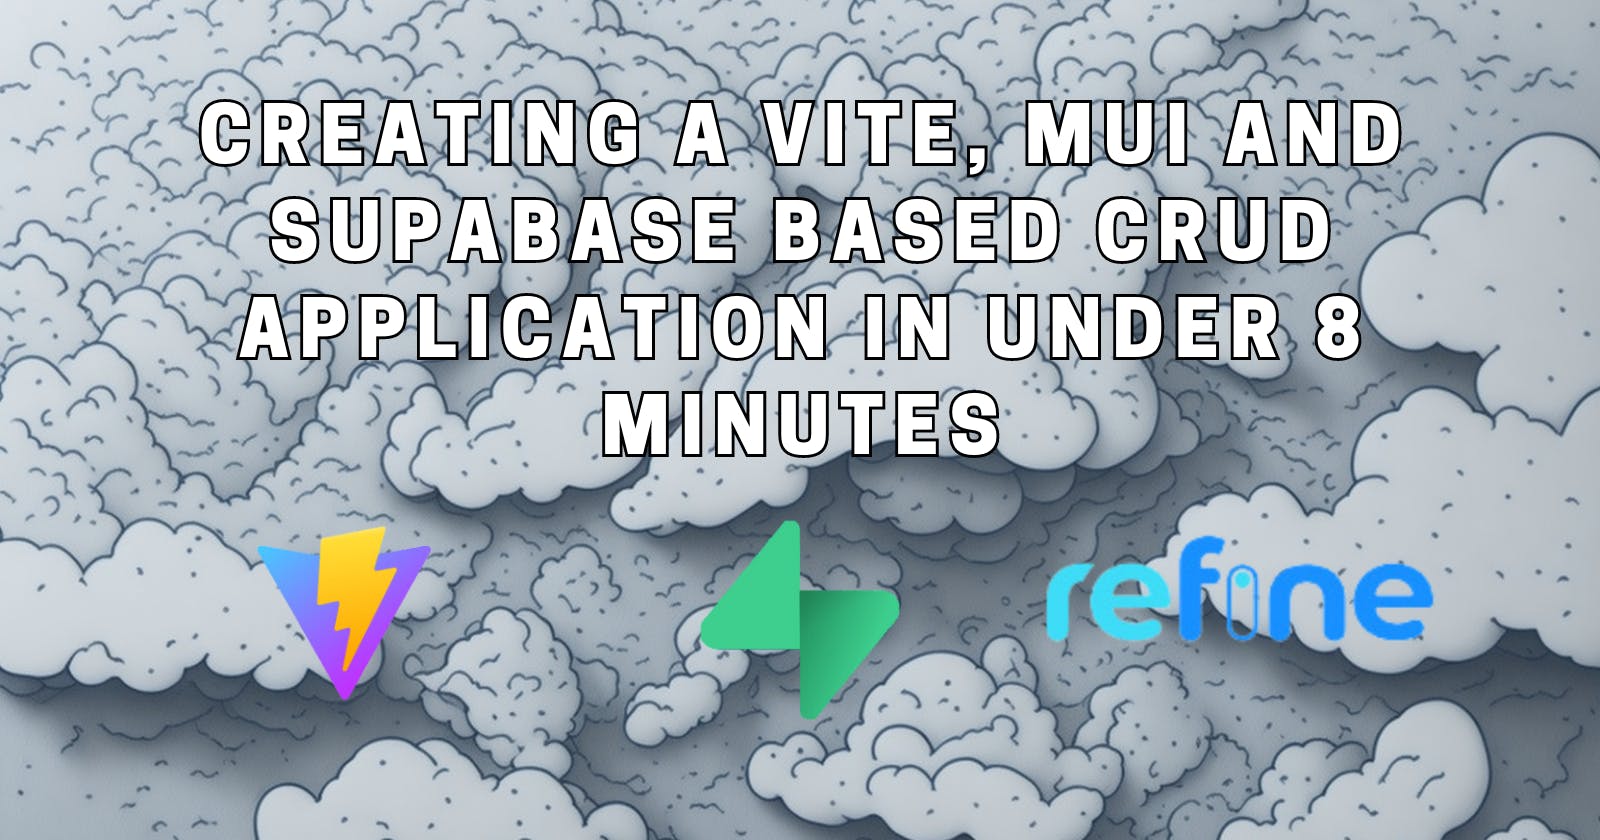 Creating a Vite, Mui and Supabase based CRUD application with refine.dev in under 8 minutes.